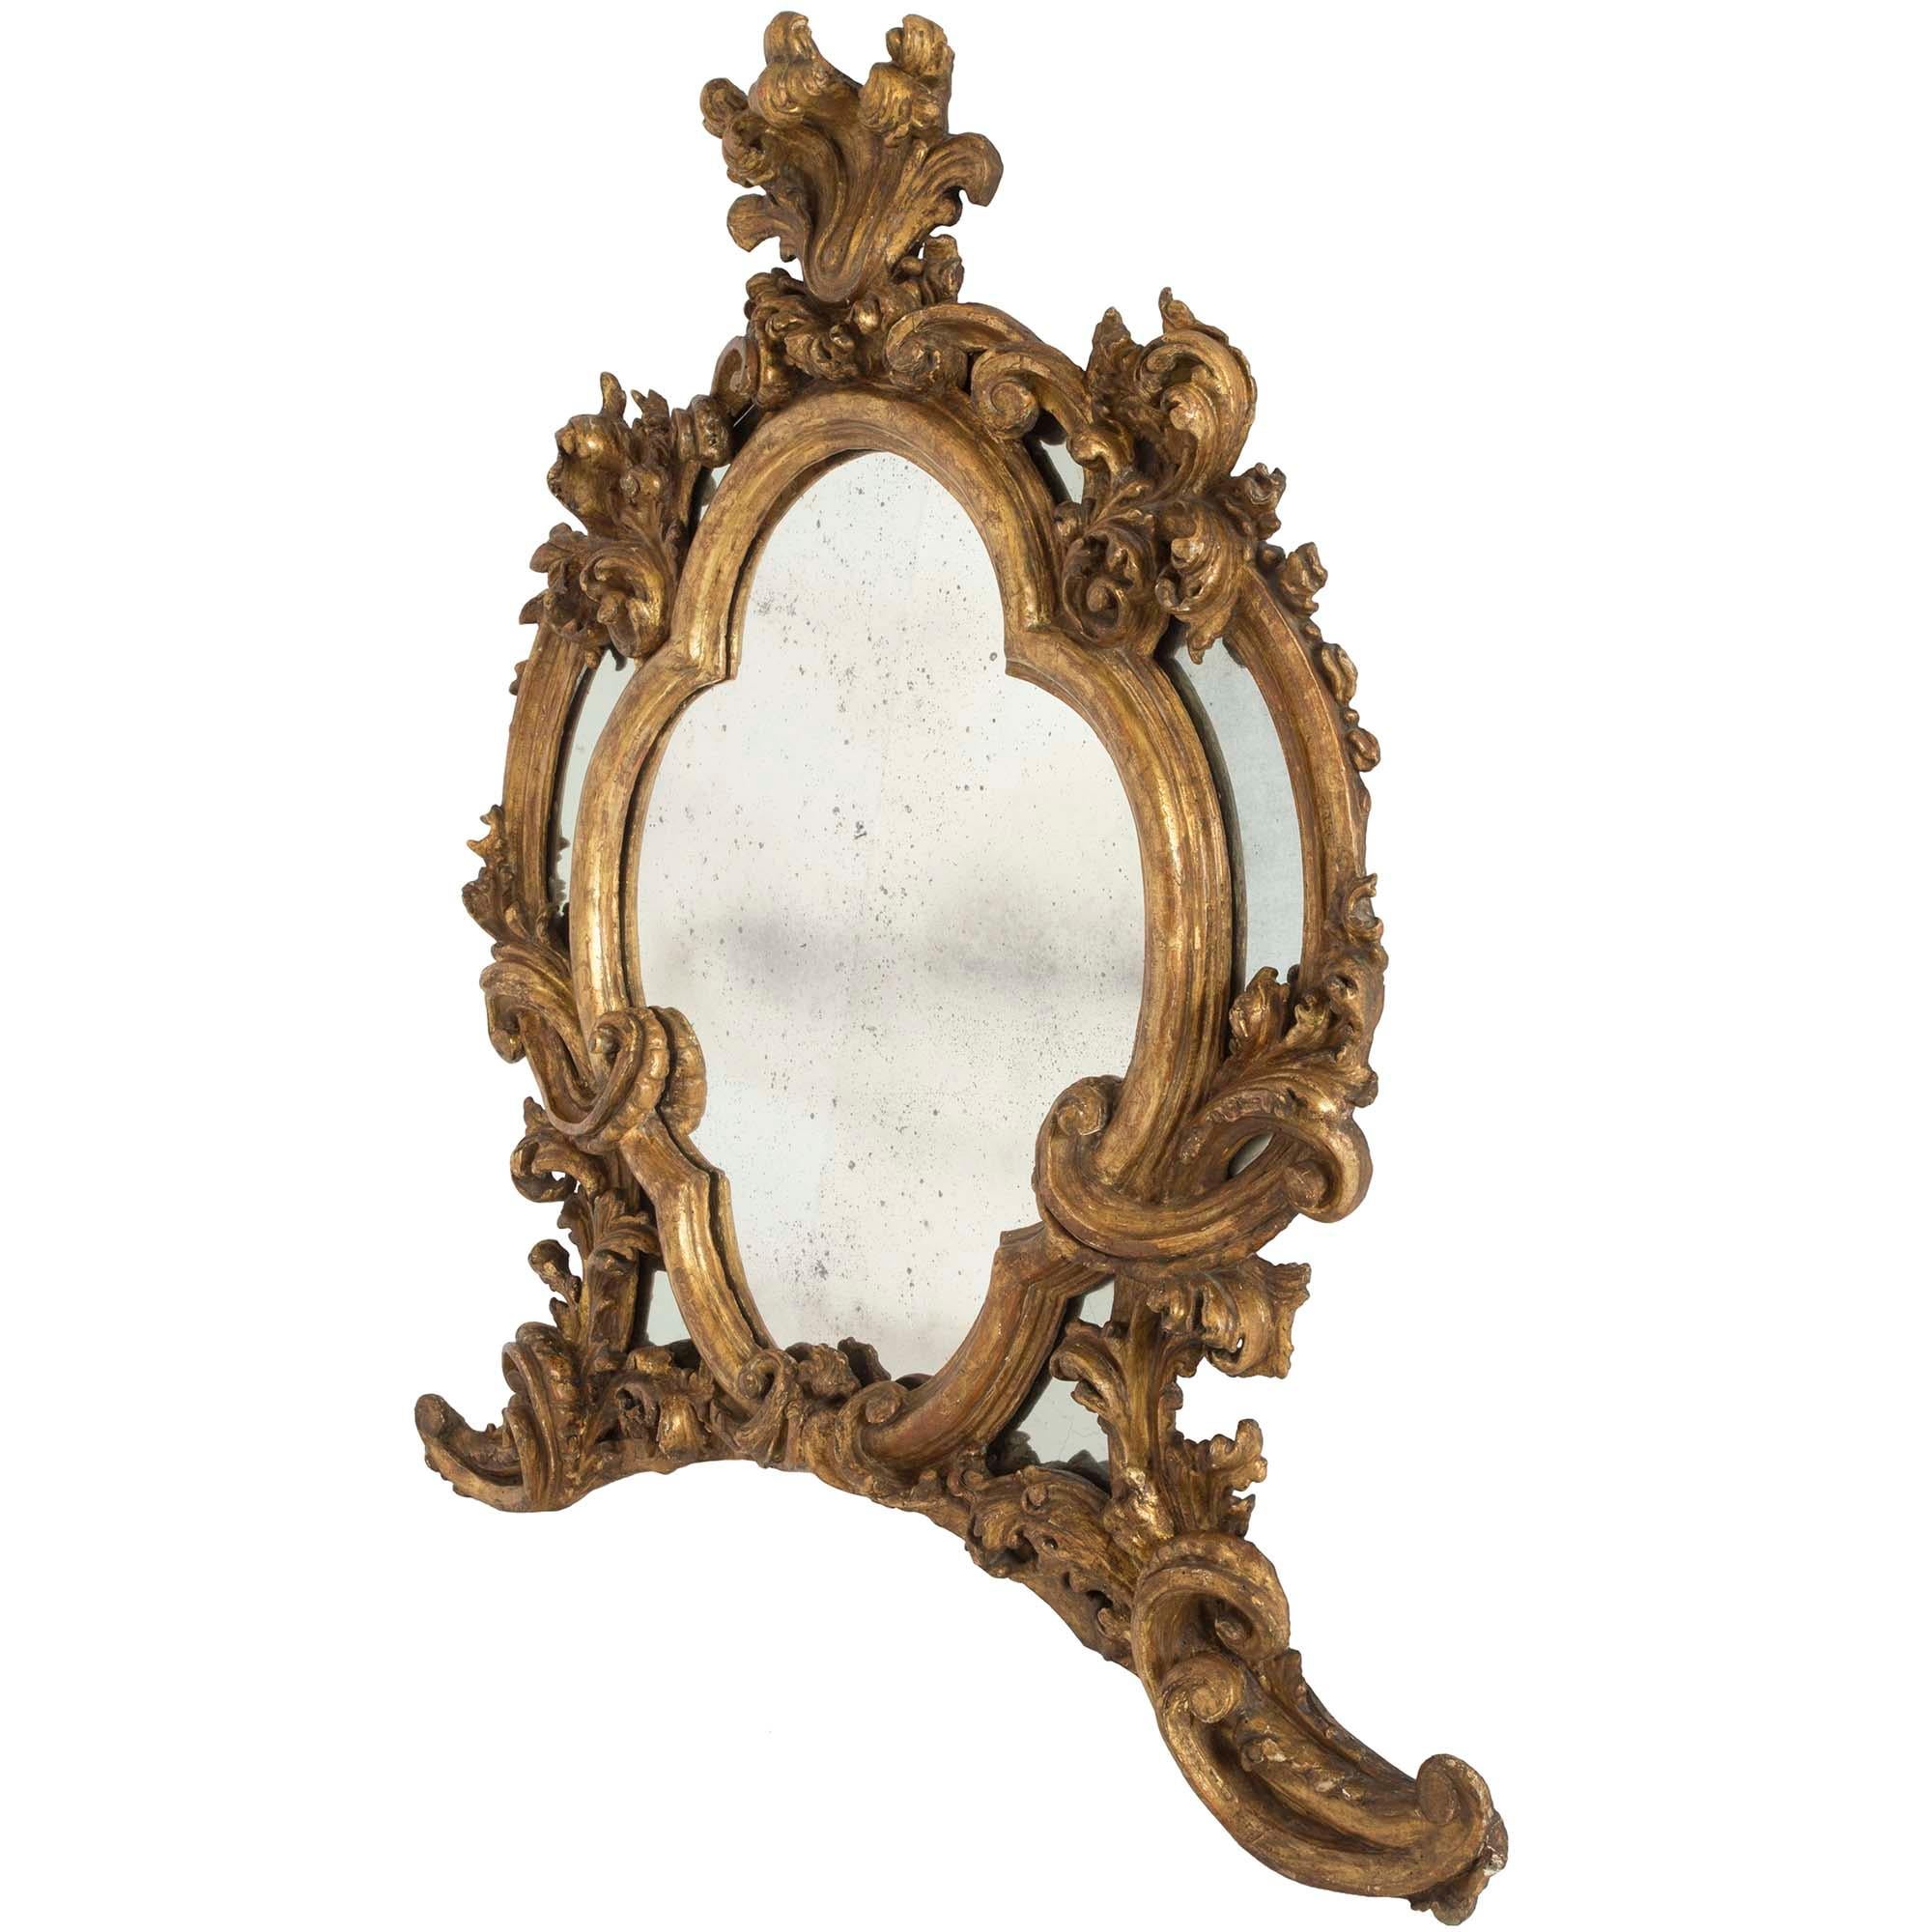 A wonderful Italian early 19th century Baroque st. double framed Mecca mirror. The mirror is raised by wonderful scrolled feet with richly carved foliate movements which extend up each side. The original central mirror plate is framed within a most